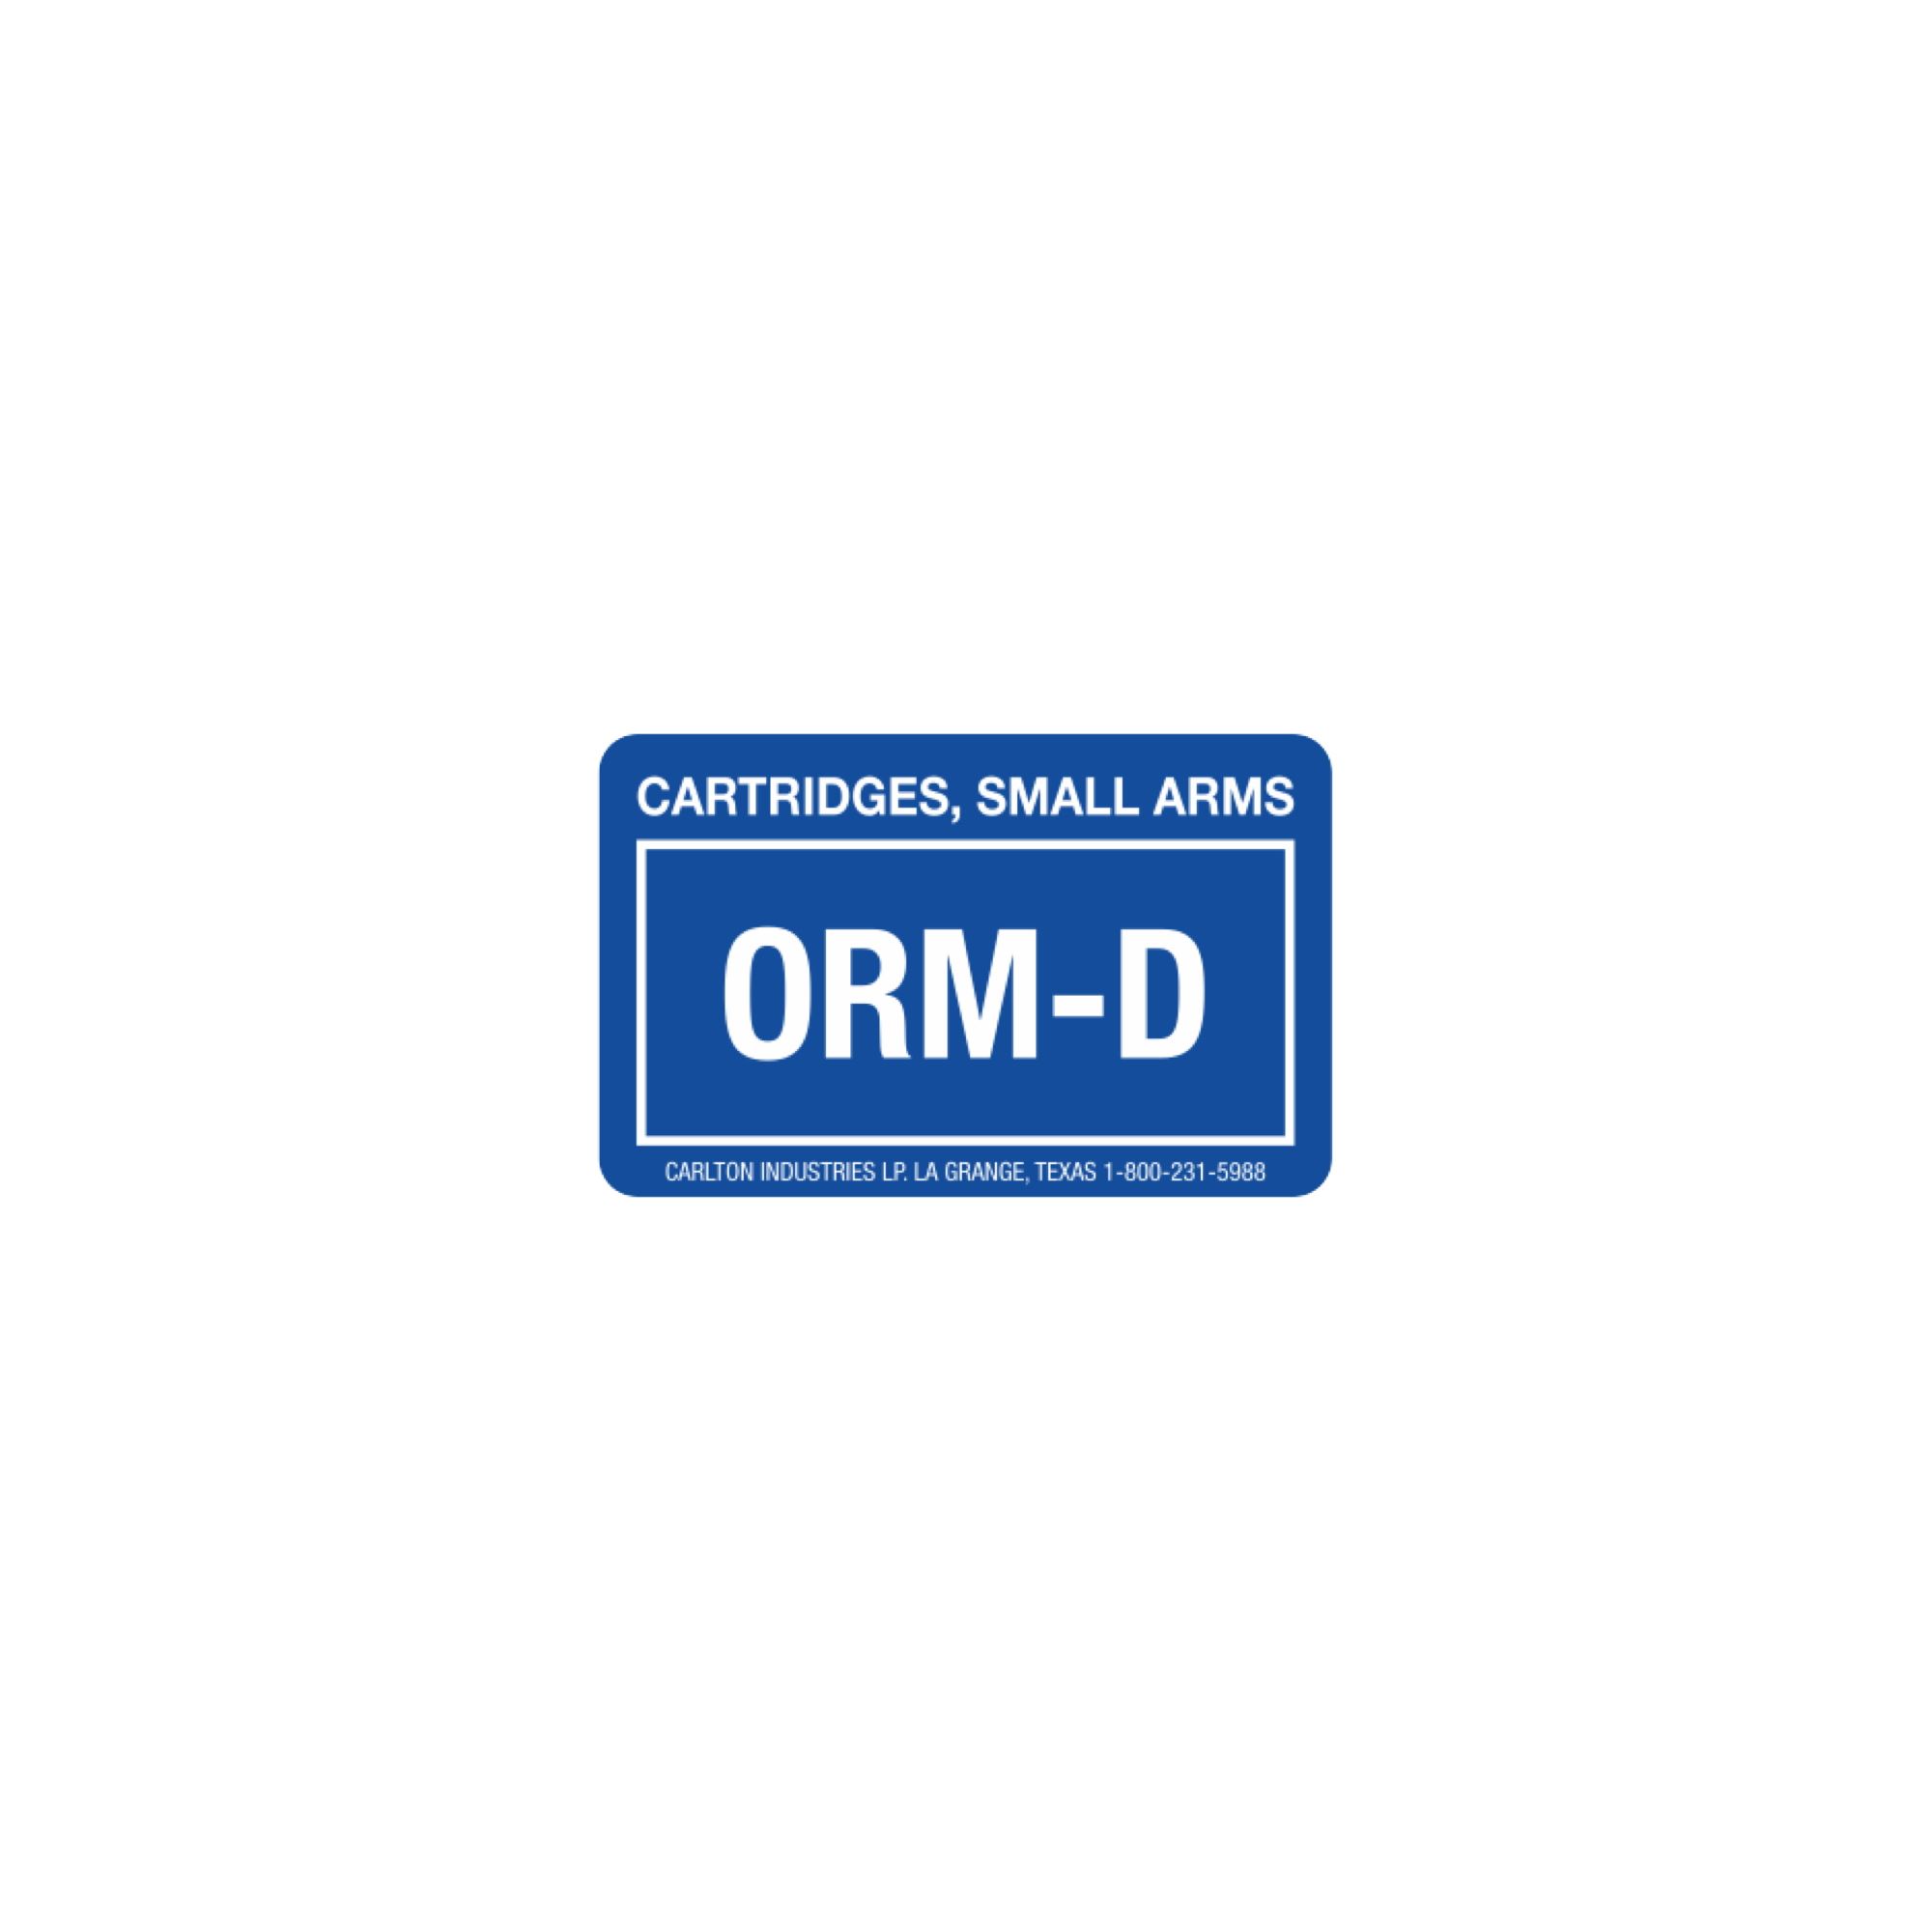 ORM D Labels Cartridges, Small Arms 1 3/8" x 2 1/4"